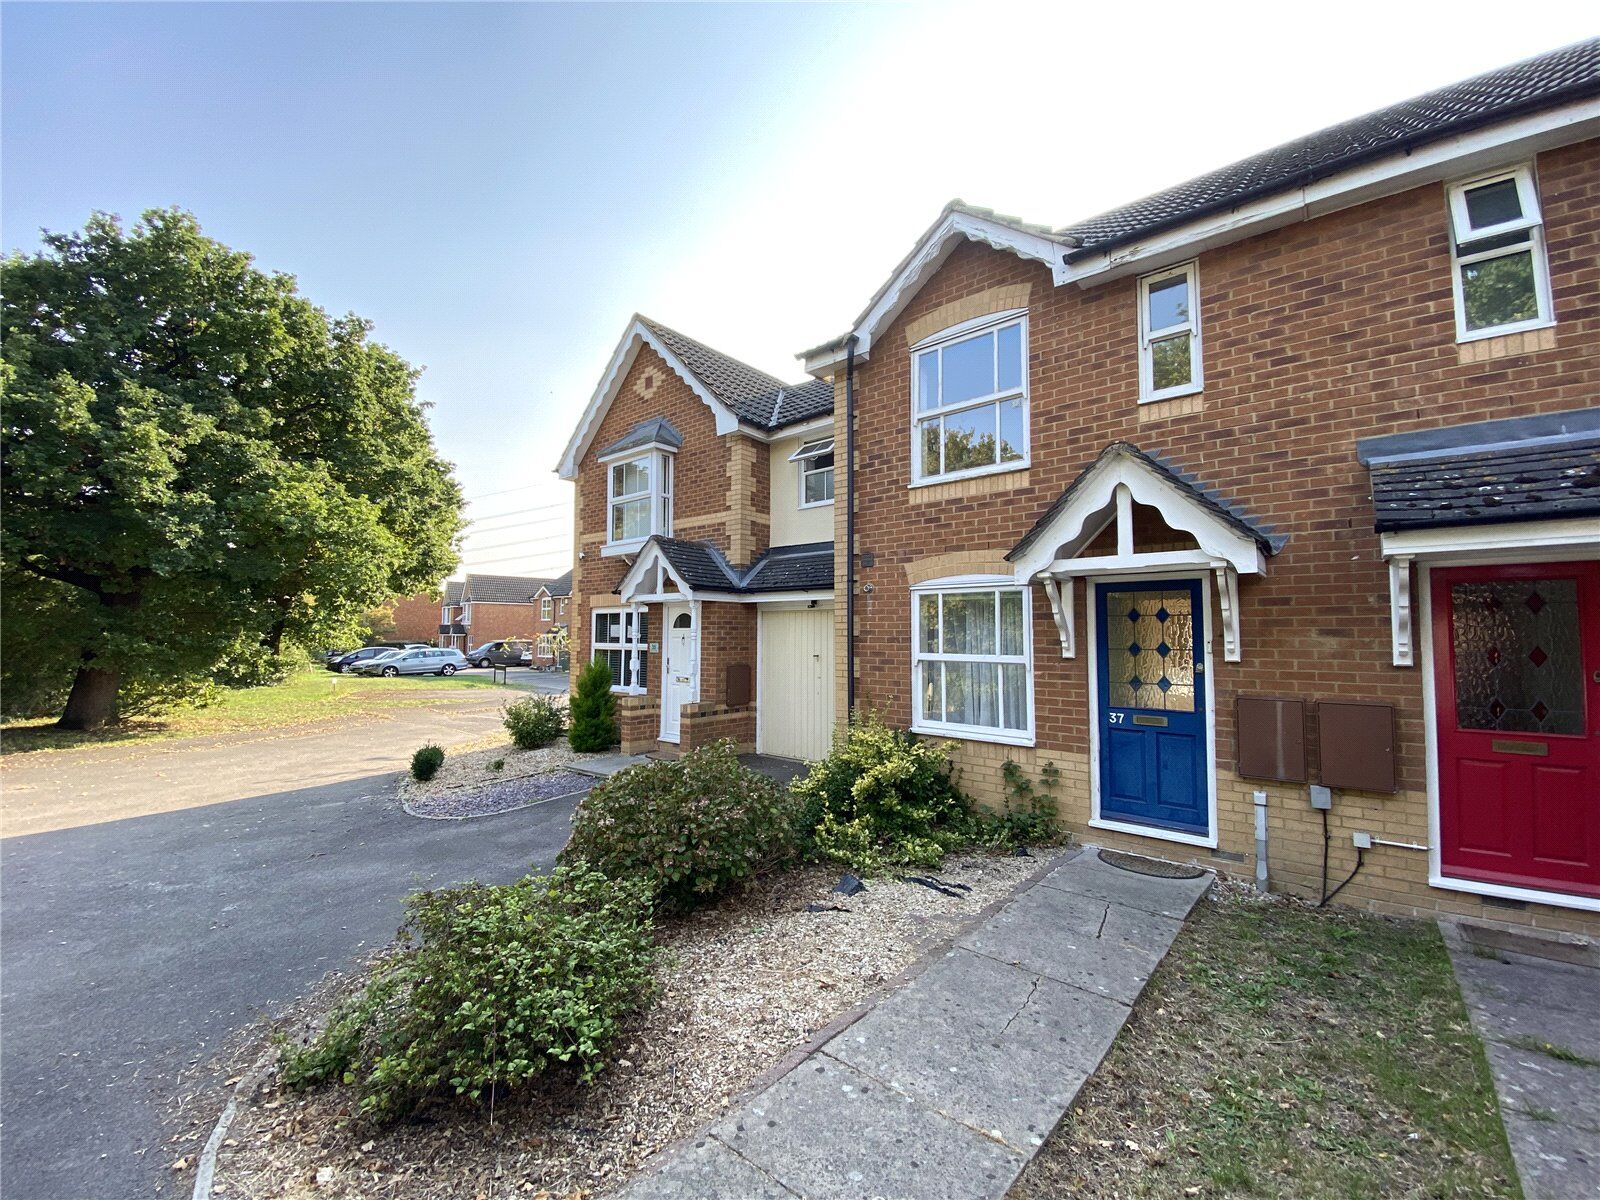 2 bedroom mid terraced house for sale Penpont Water, Didcot, OX11, main image